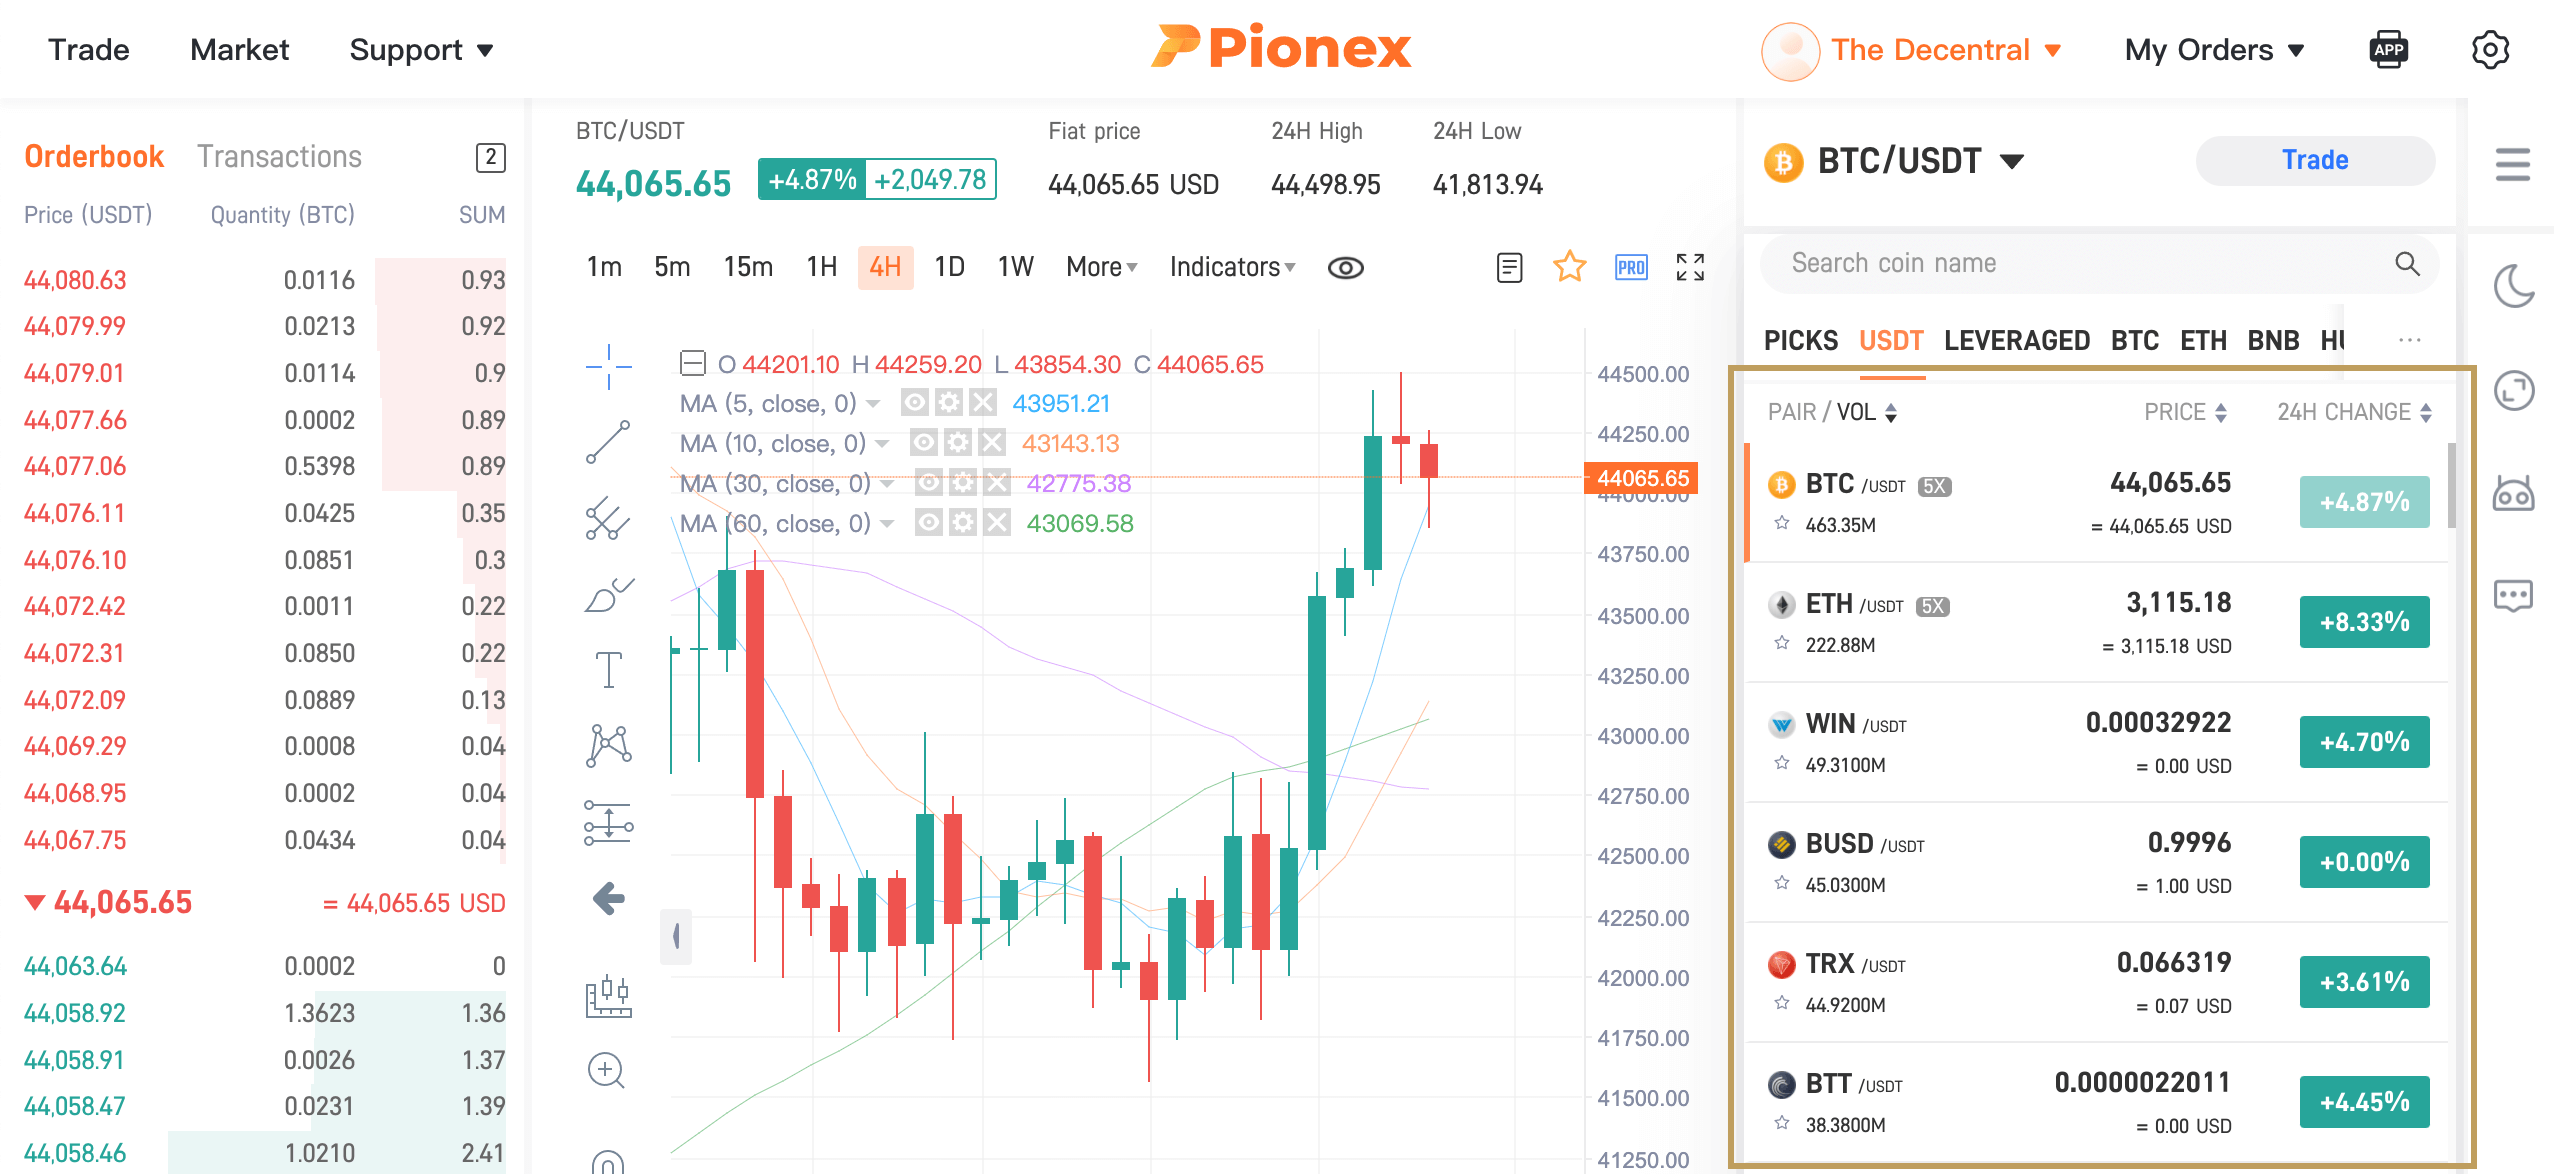 Pionex Exchange View. The selection of cryptocurrencies is highlighted. Pionex offers a wide selection from BTC, BUSD to leveraged tokens like BTC3S.